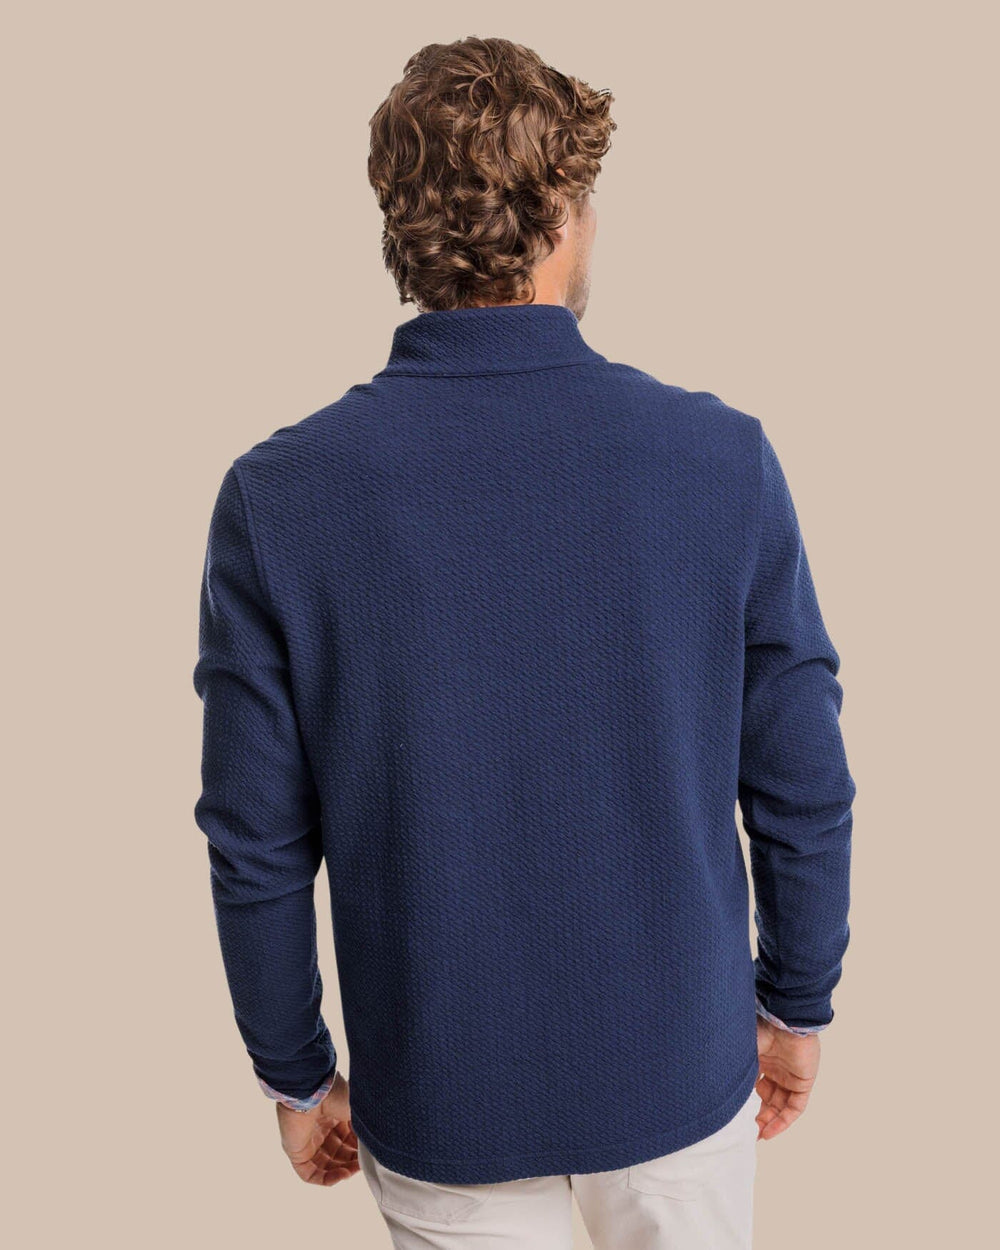 The back view of the Southern Tide Heather Outbound Quarter Zip by Southern Tide - Heather True Navy